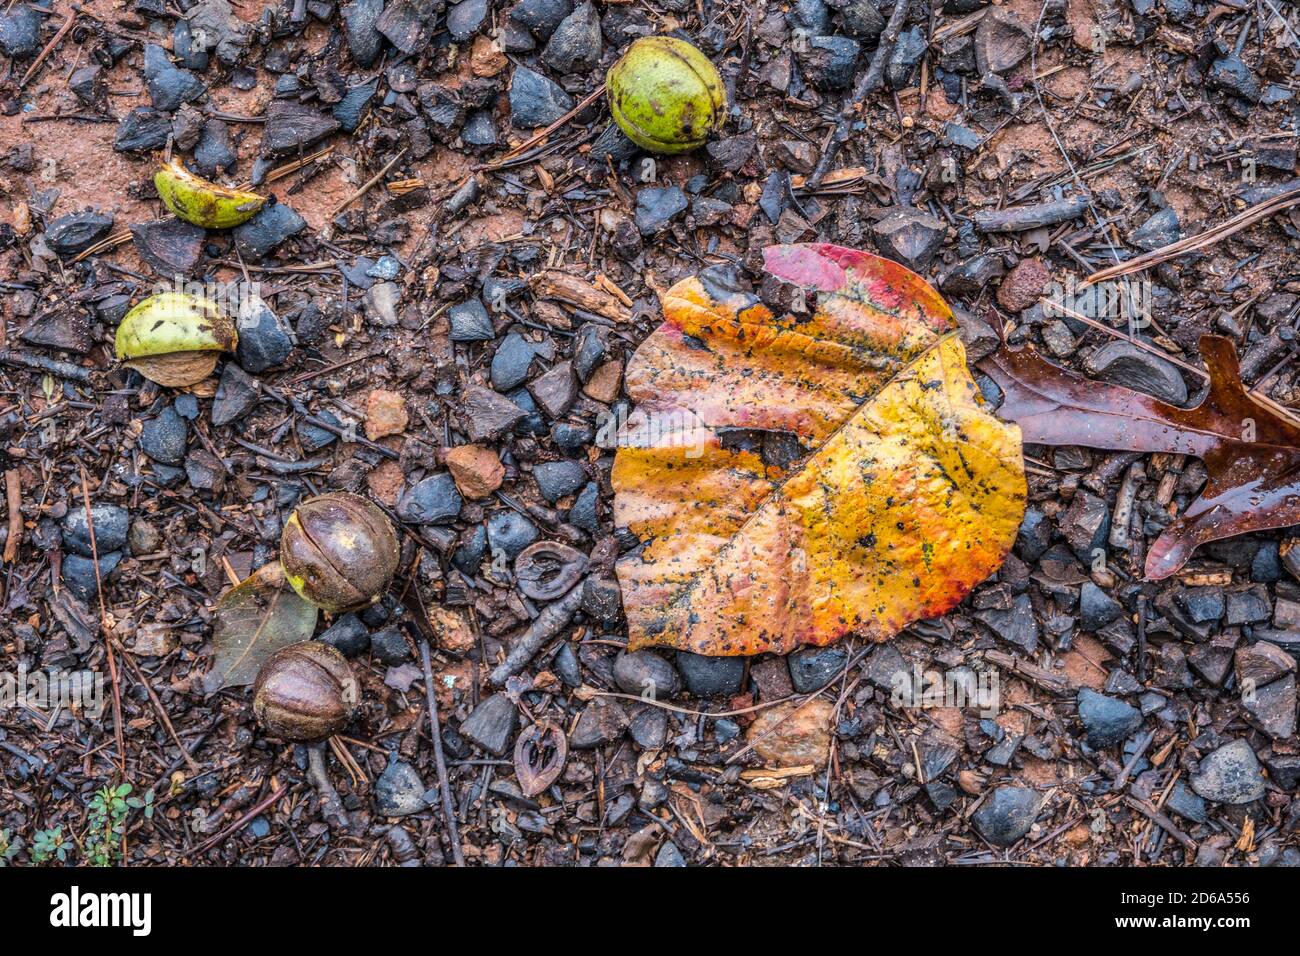 Fallen nuts with shells and twigs and a bright colorful autumn leaf and other debris all on the forest floor after the rainfall Stock Photo